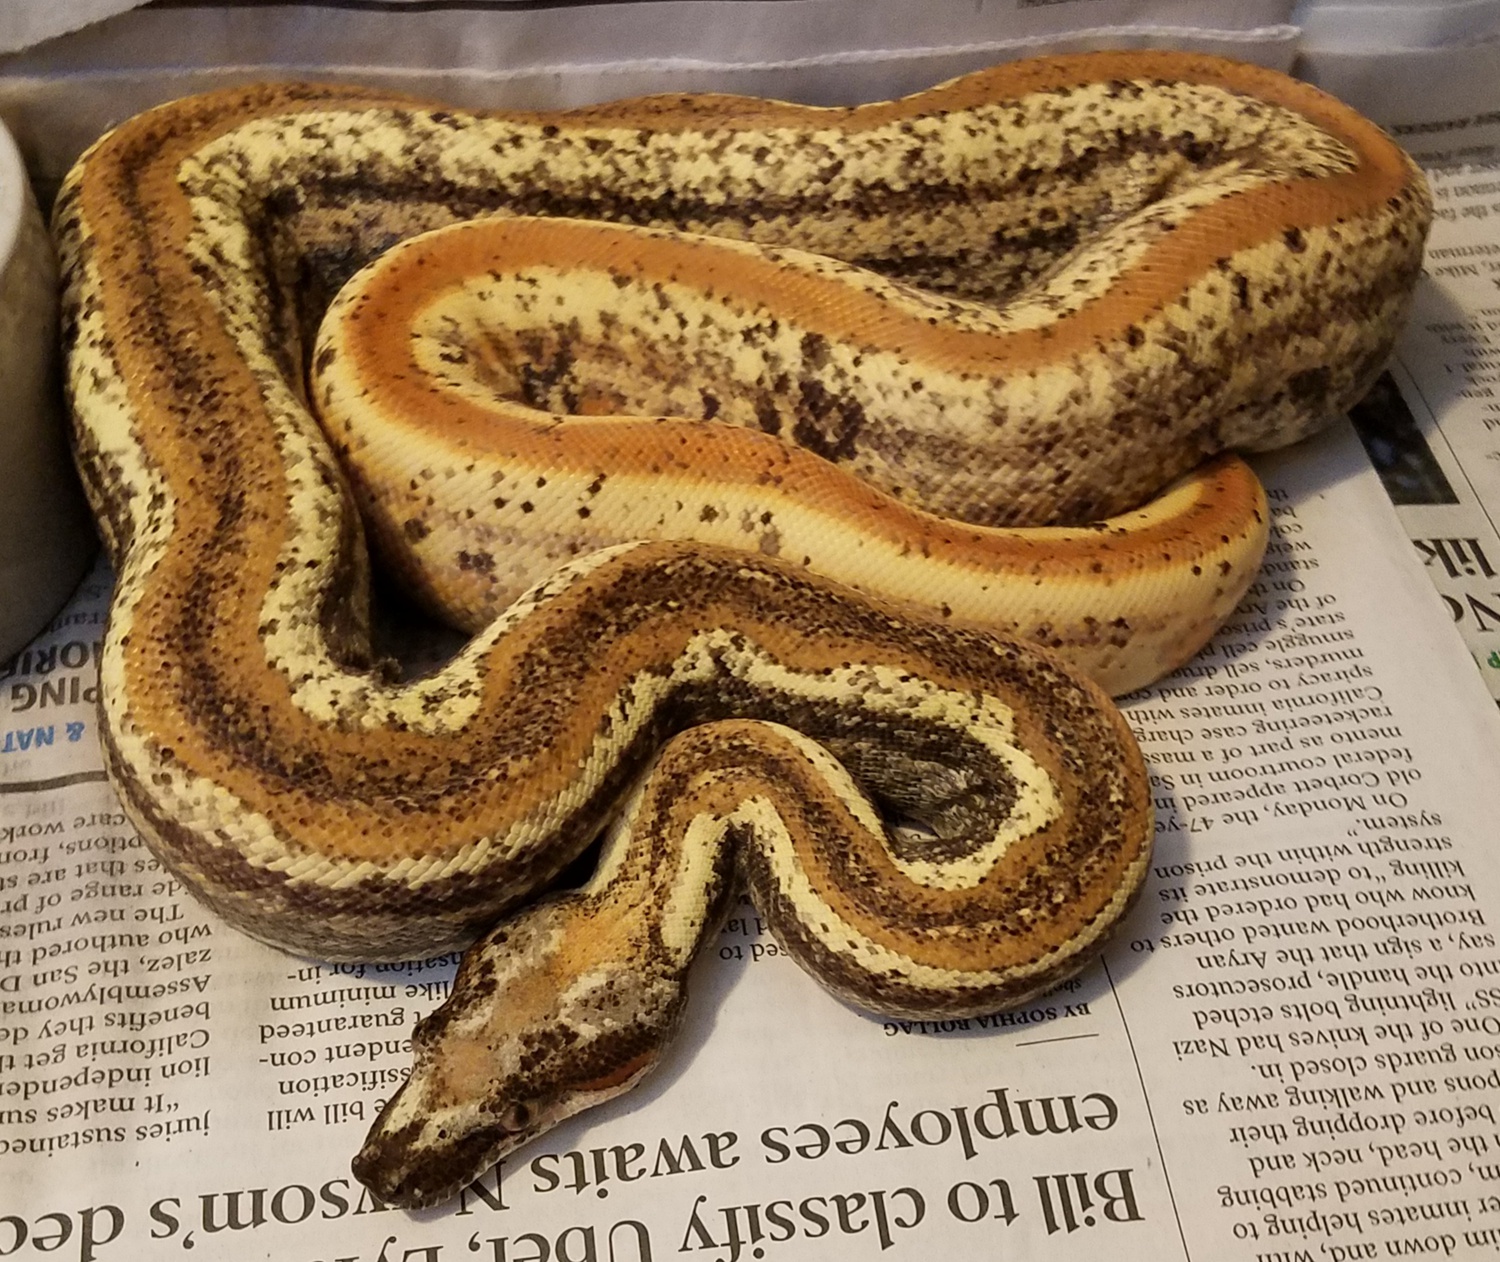 IMG VPI Sunglow Jungle Motley Female Boa Constrictor by SKR